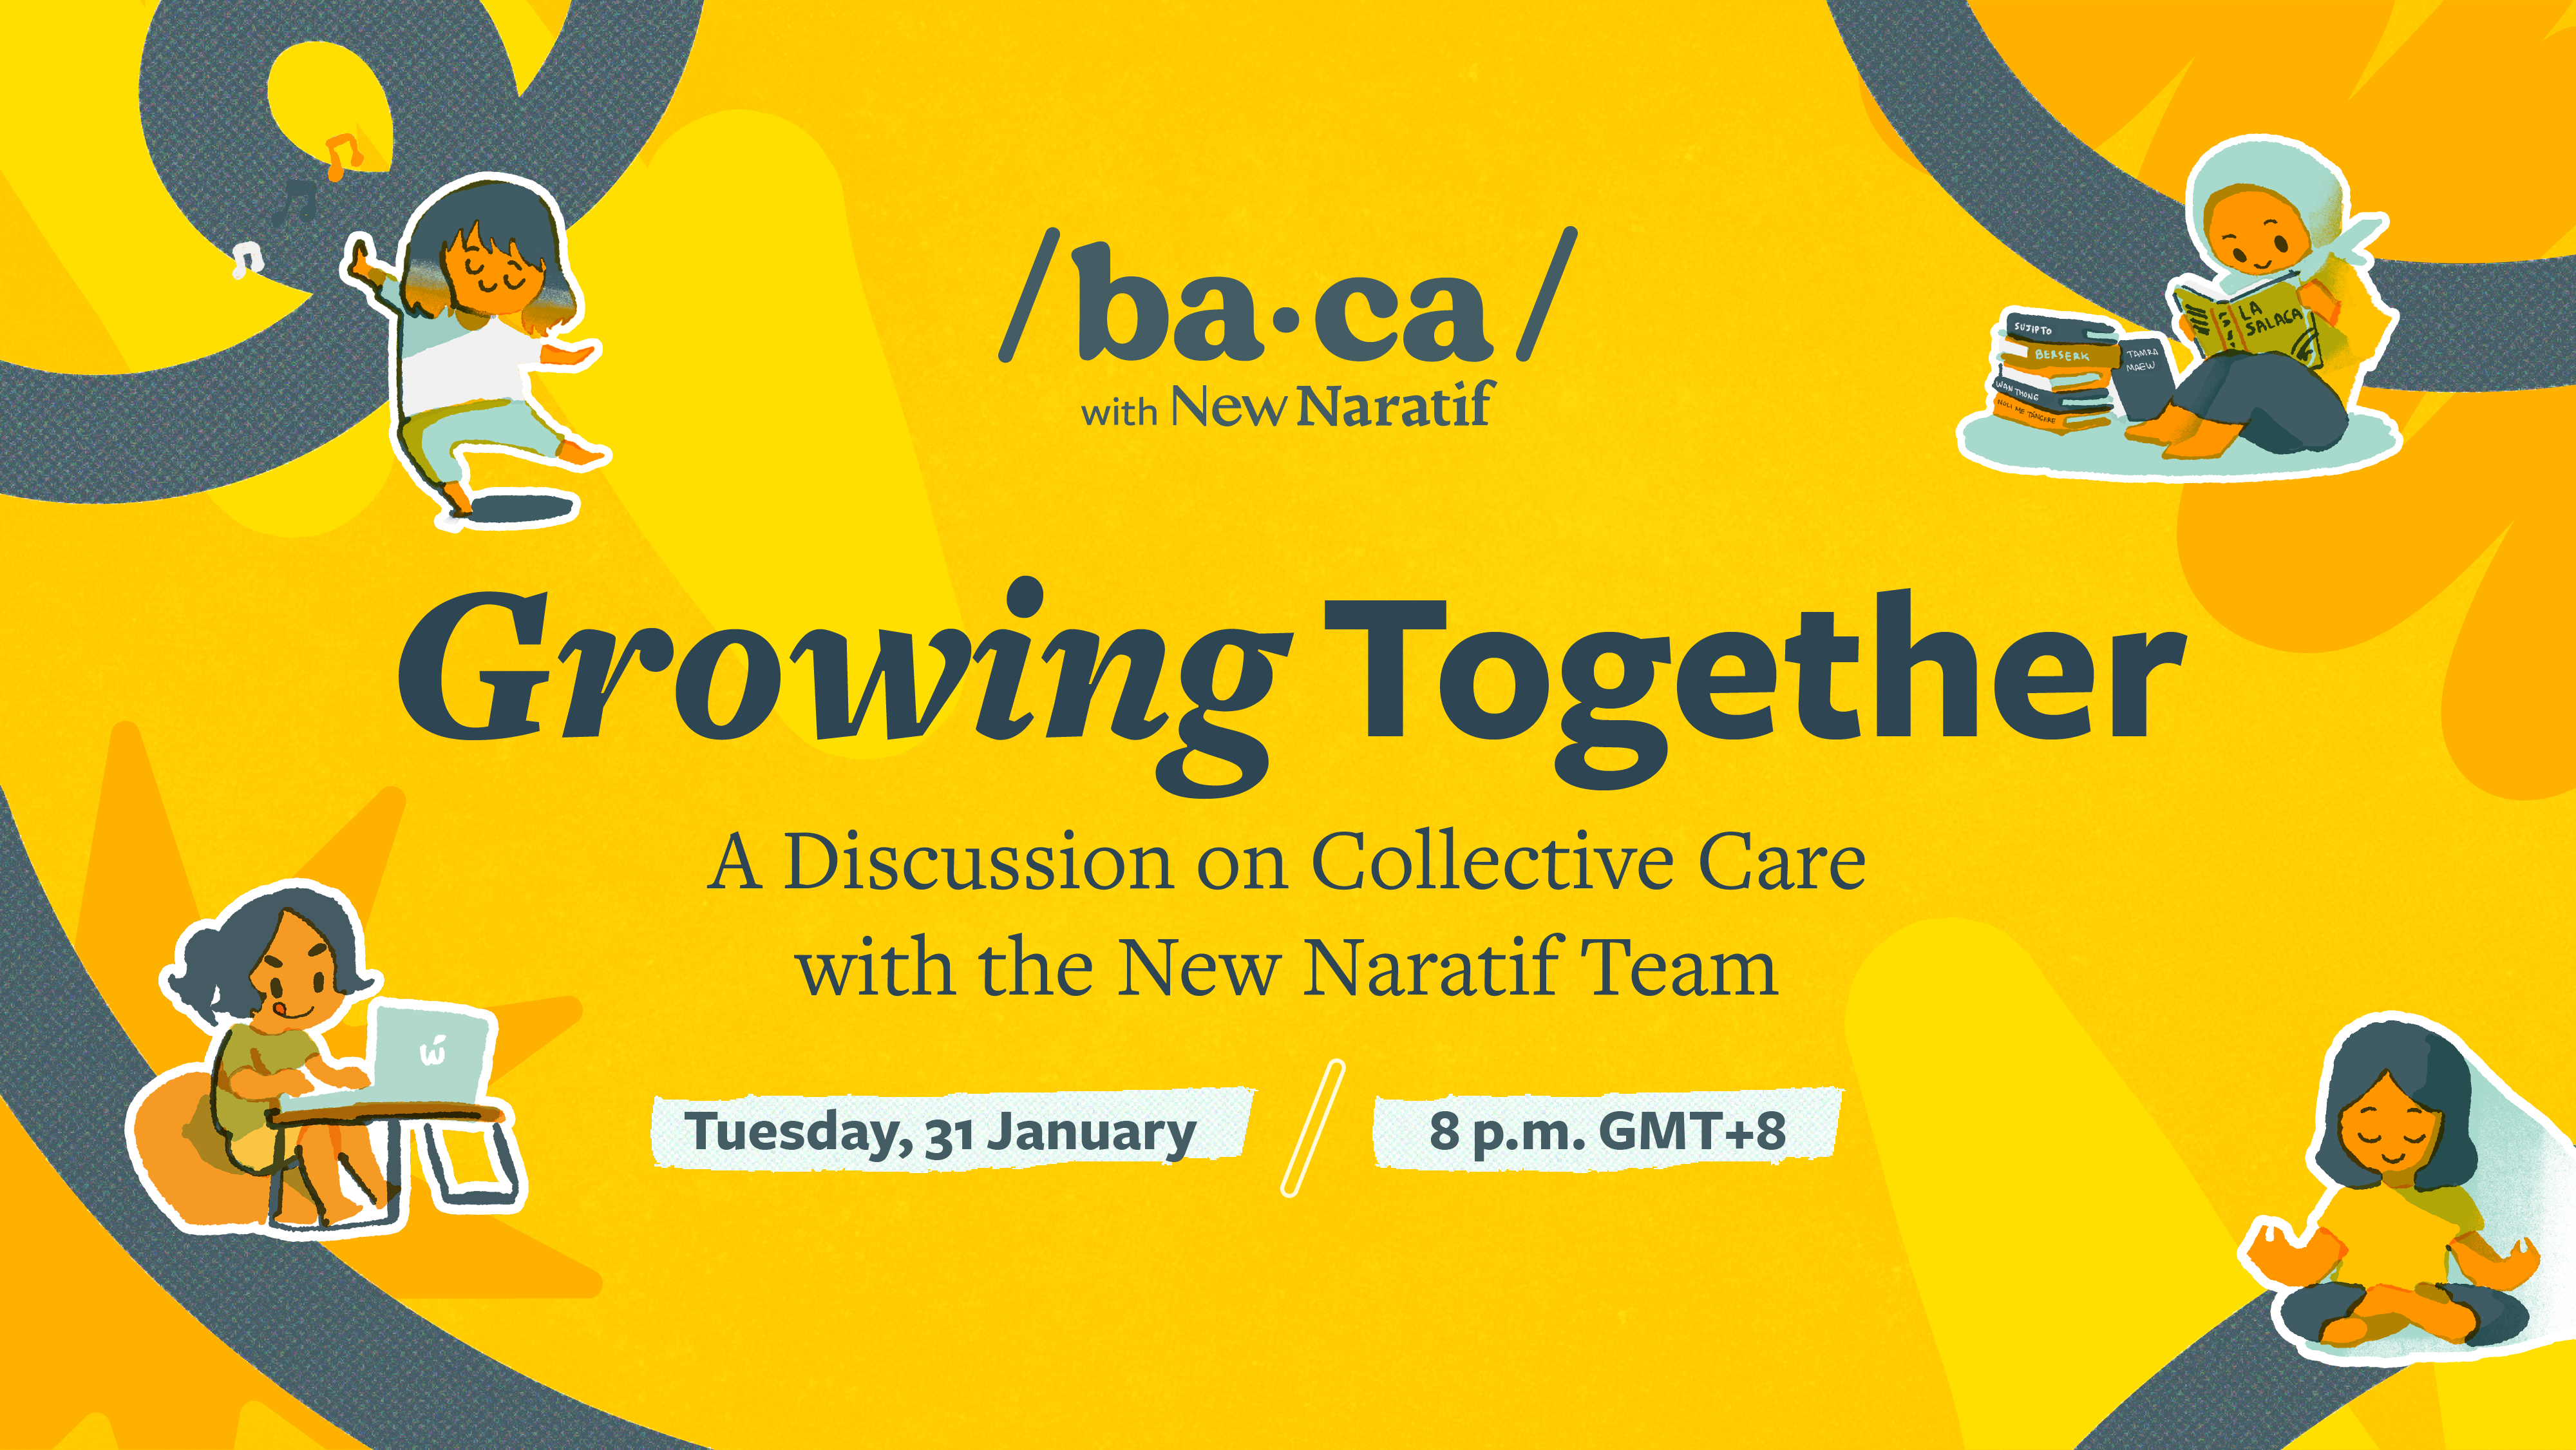 /ba.ca. with New Naratif. Growing Together: A Discussion on Collective Care with the New Naratif team. Tuesday, 31st January, 8 p.m. GMT+8